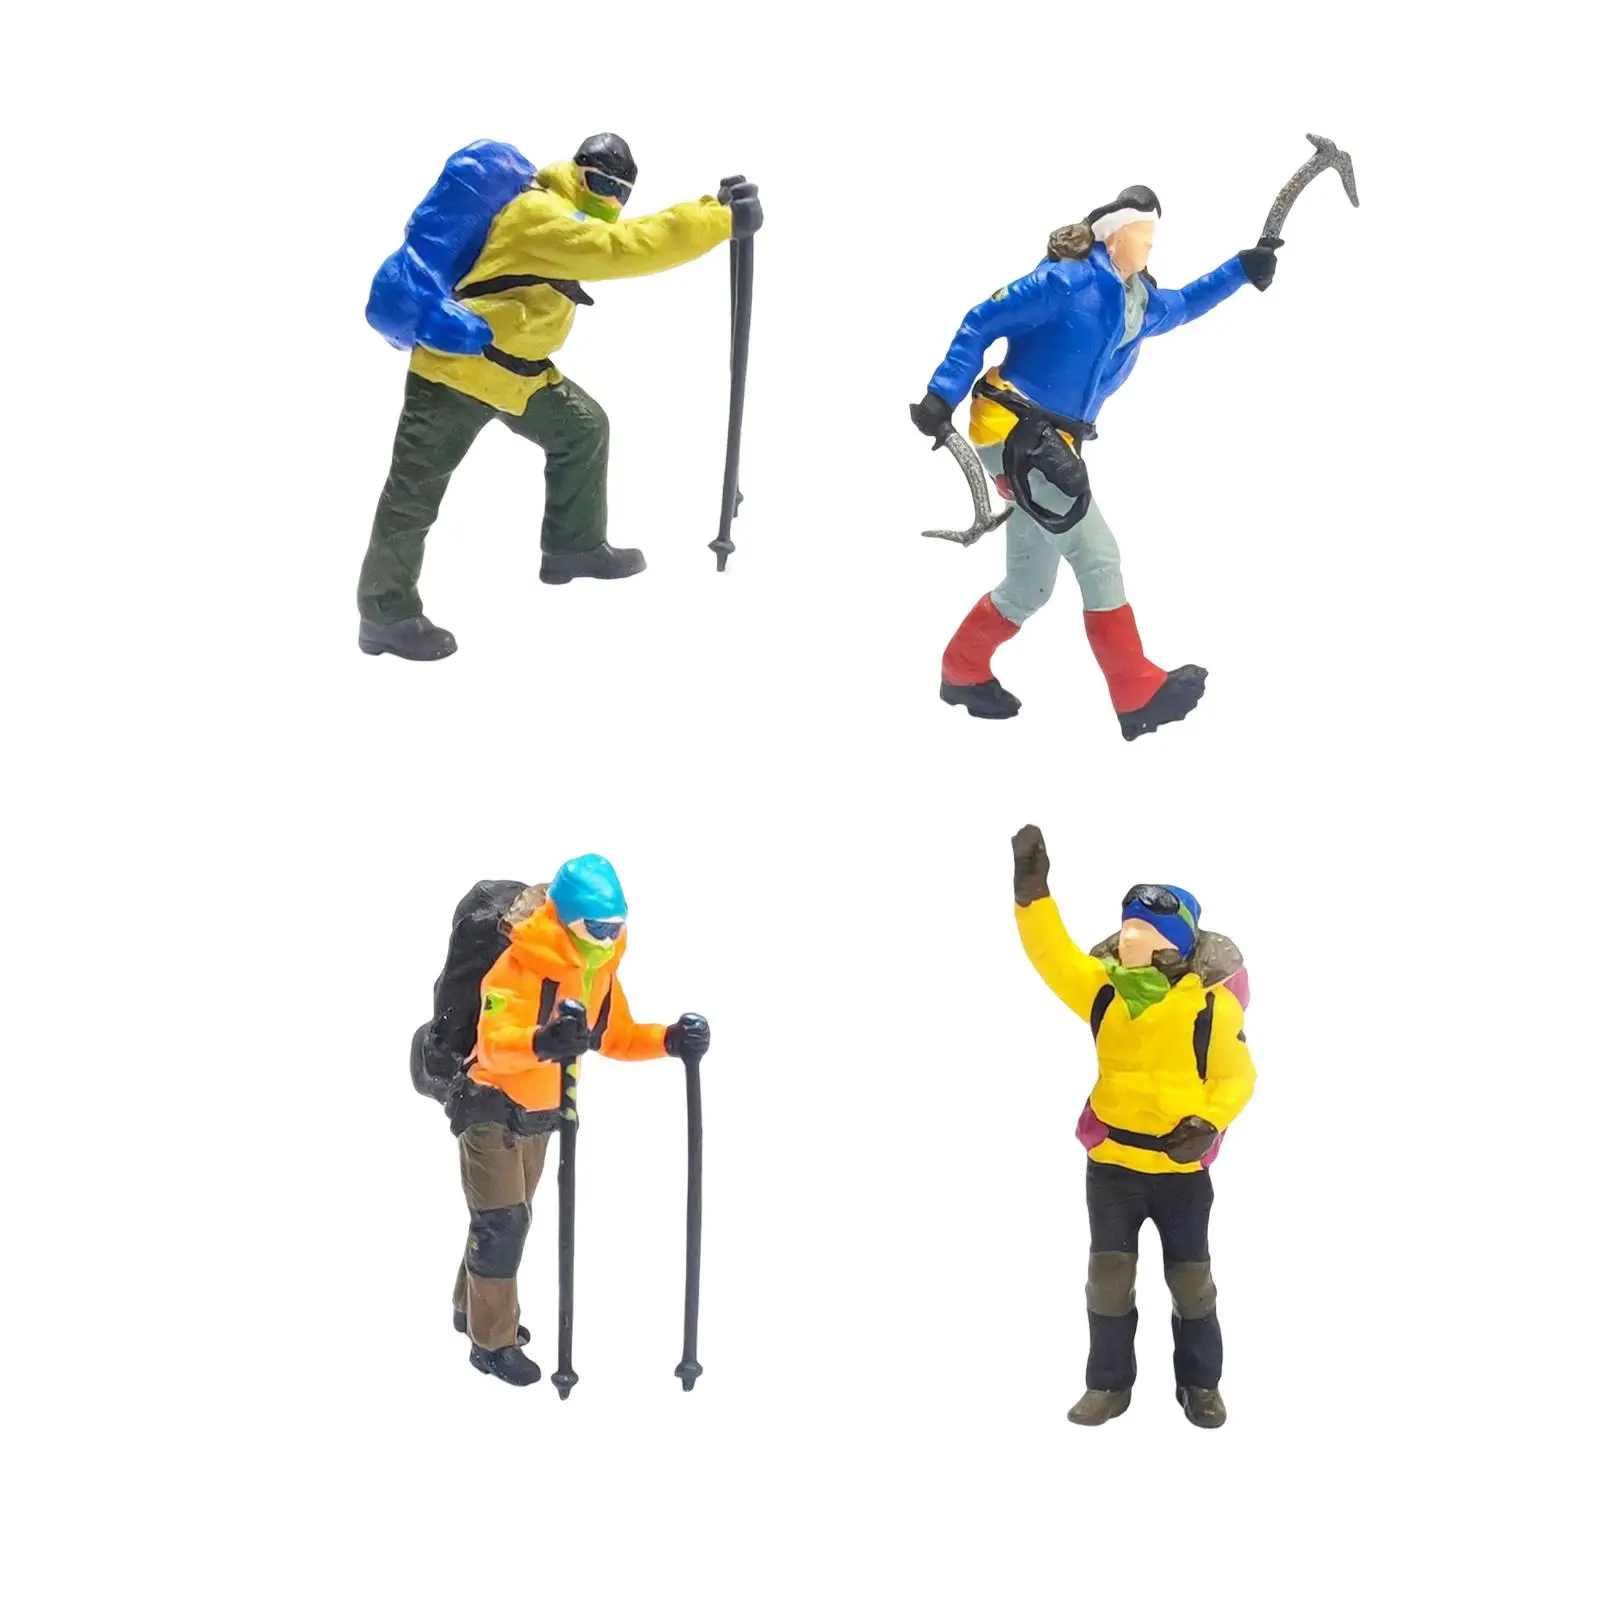 1/64 Climbing People Figurines Mountaineering People Figurines Tiny People Ornament for DIY Scene DIY Projects Layout Decor